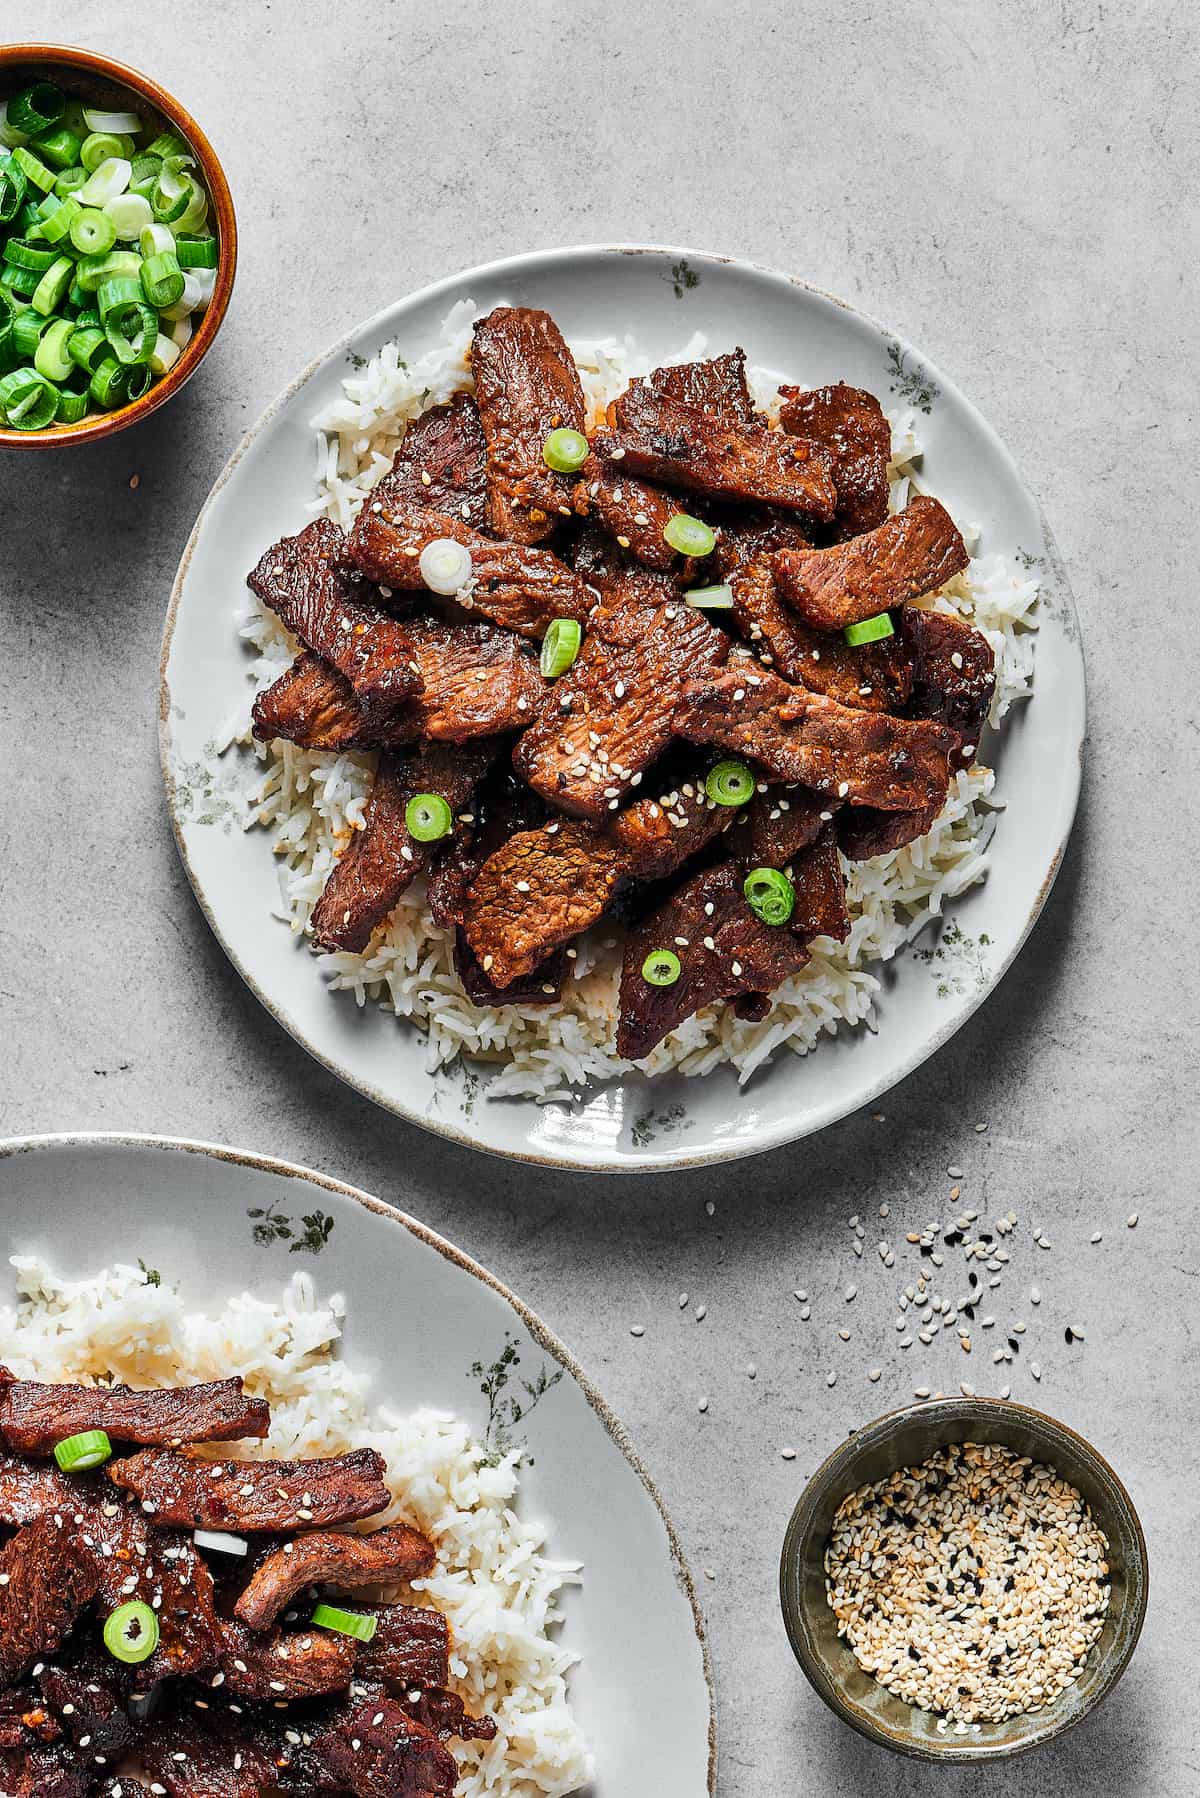 Cooked steak slices on a bed of rice, with garnishes of green onion and sesame seeds.